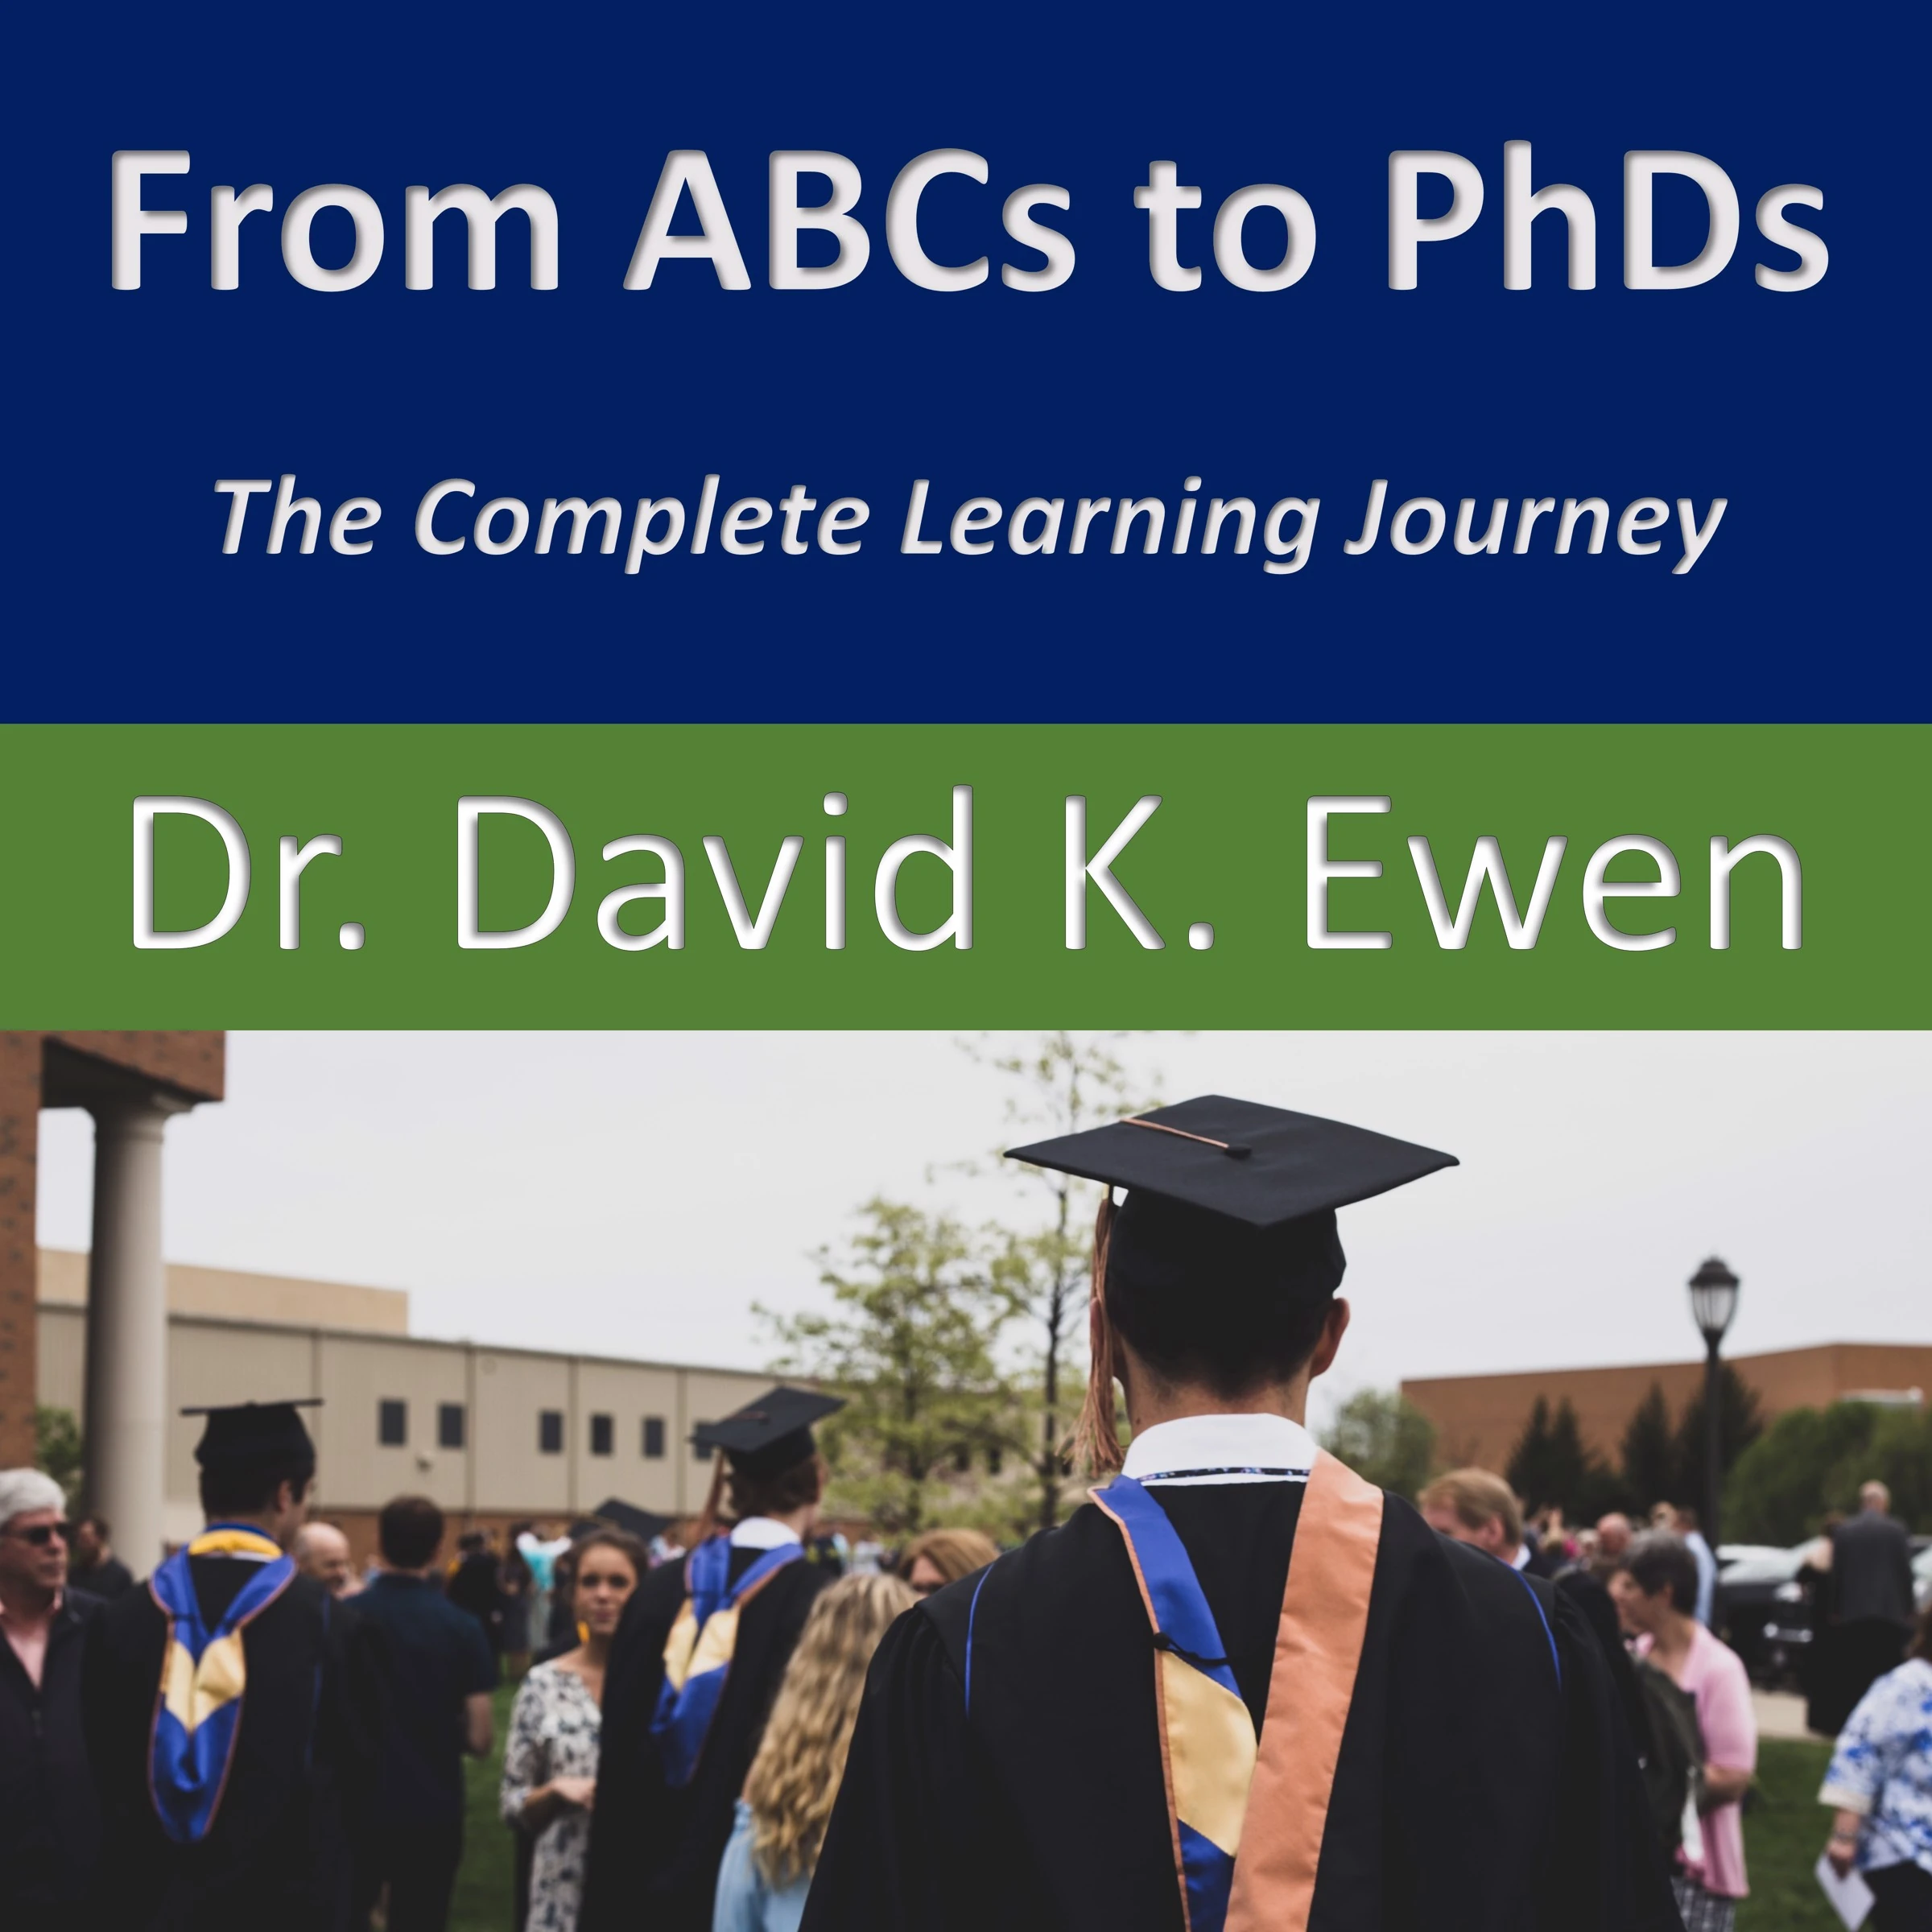 From ABCs to PhDs Audiobook by Dr. David K. Ewen